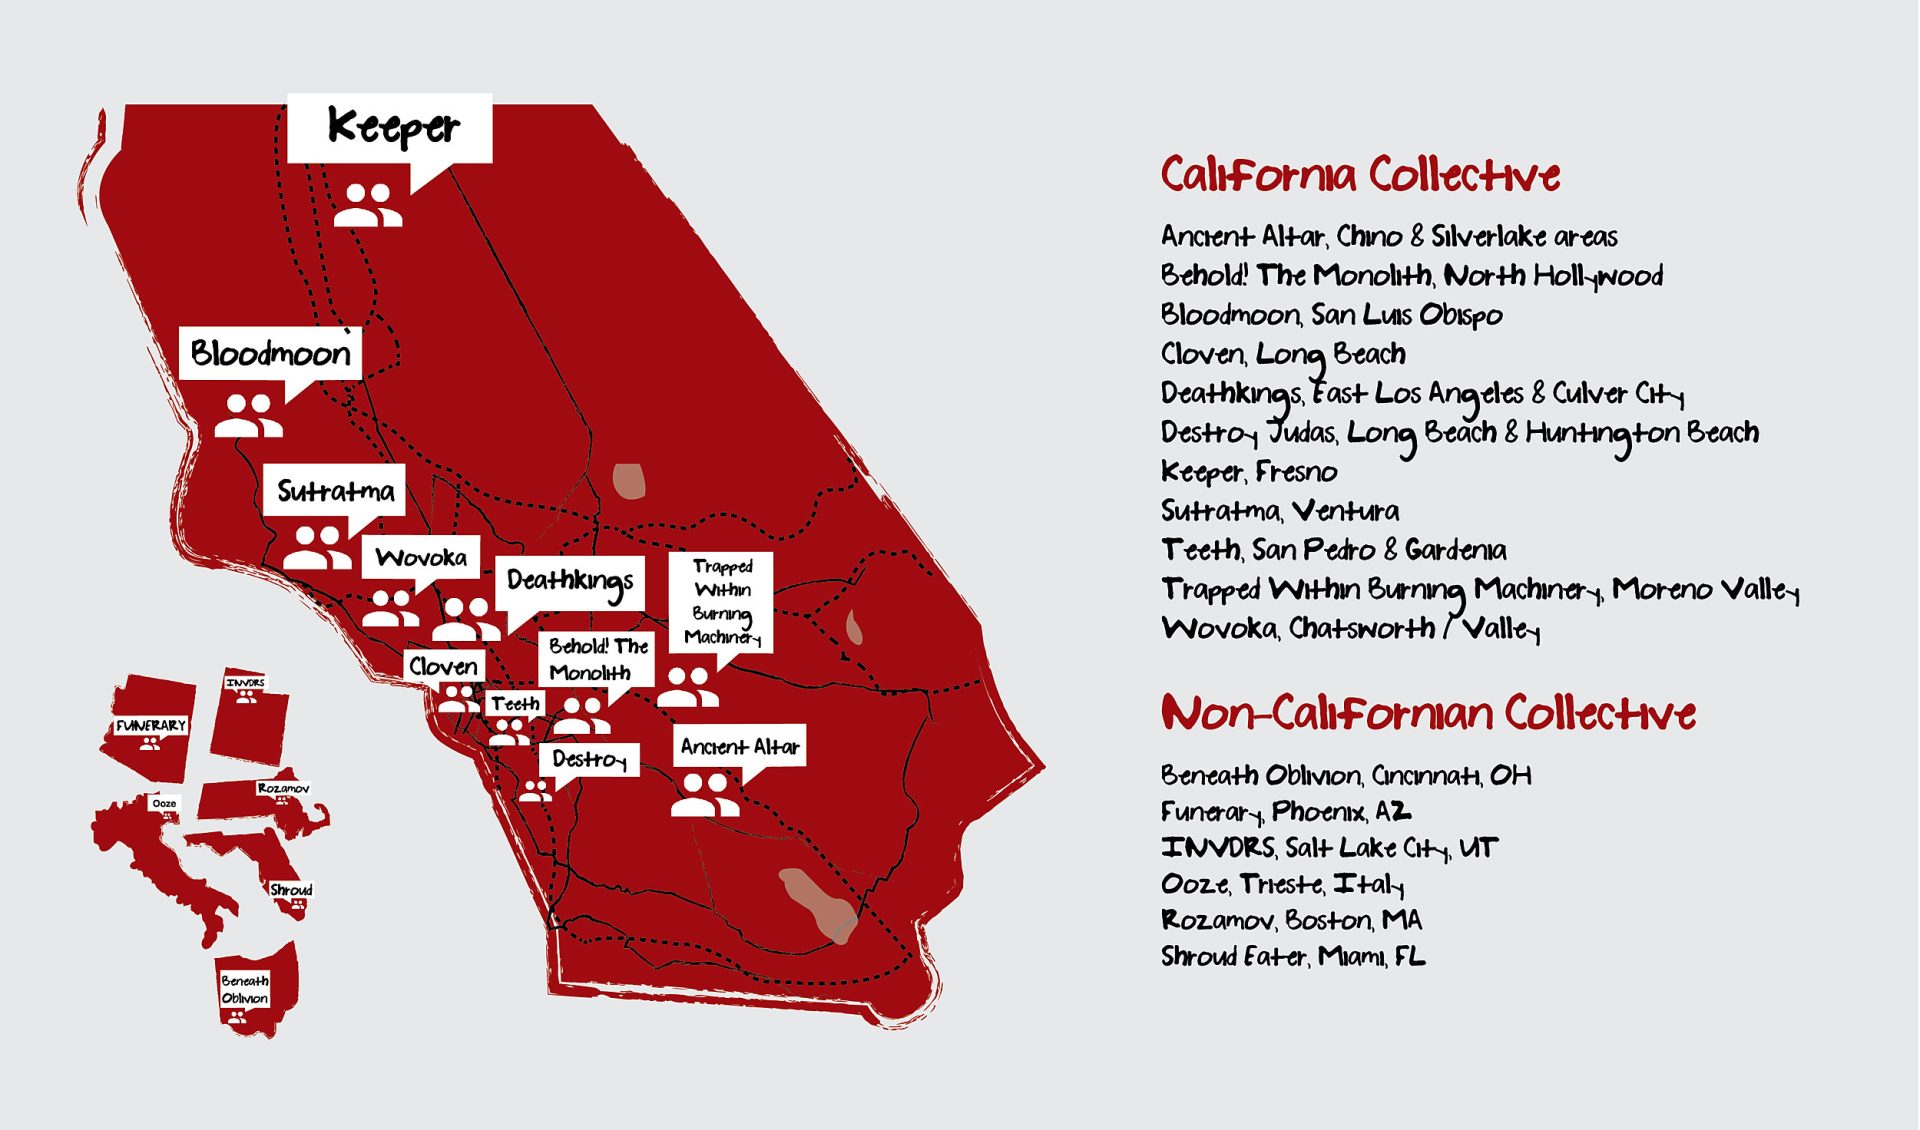 The Midnite Collective, mapped onto California. Other states not to scale. 